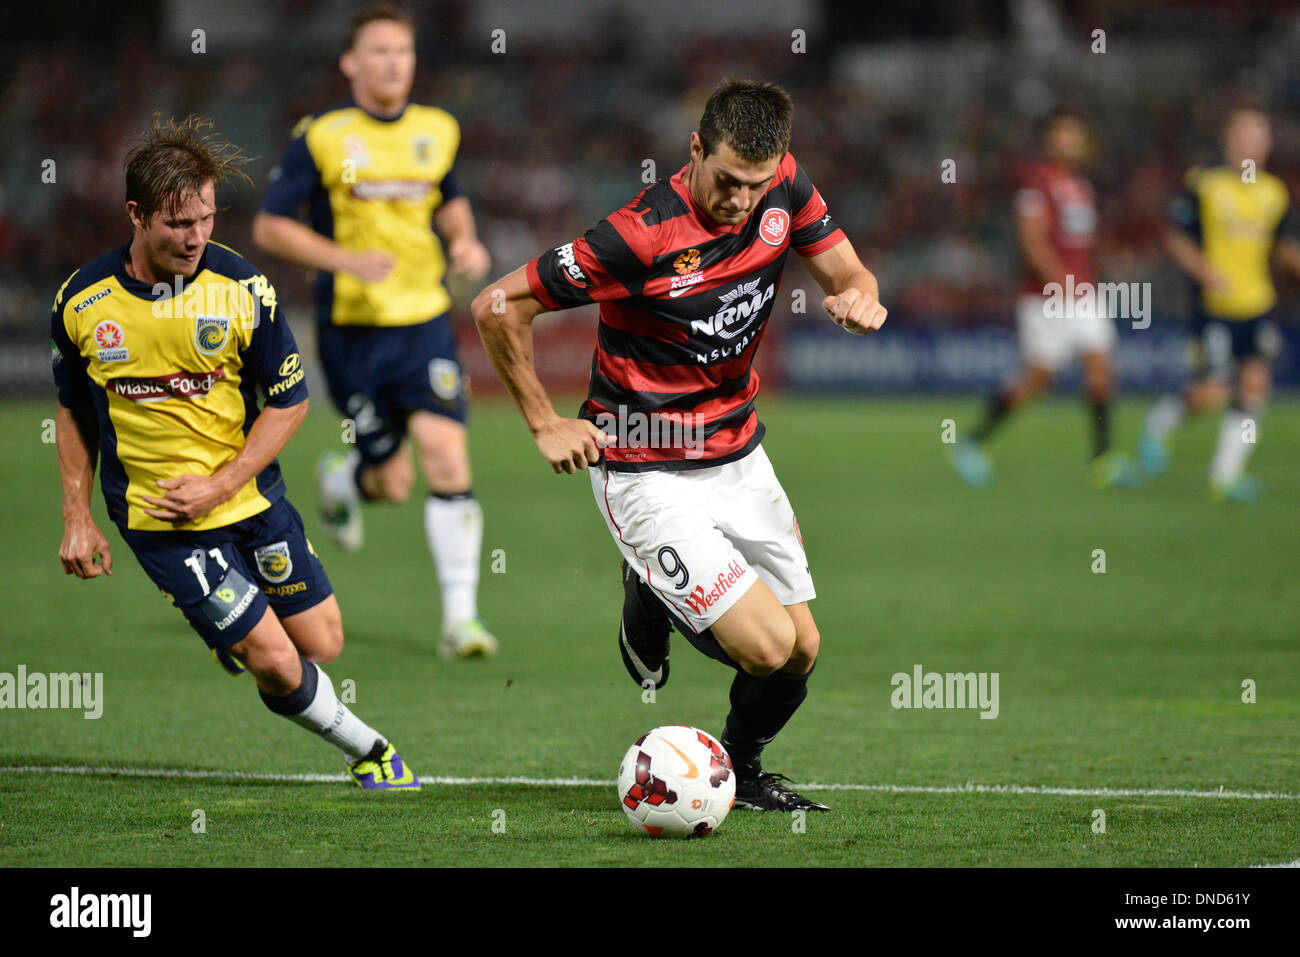 Sydney, Australia. 23rd Dec, 2013. Mariners forward Nicholas Fitzgerald and Wanderers forward Tomi Juric in action during the Hyundai A League game between Western Sydney Wanderers FC and Central Coast Mariners FC from the Pirtek Stadium, Parramatta. The Wanderers won 2-0. Credit:  Action Plus Sports/Alamy Live News Stock Photo